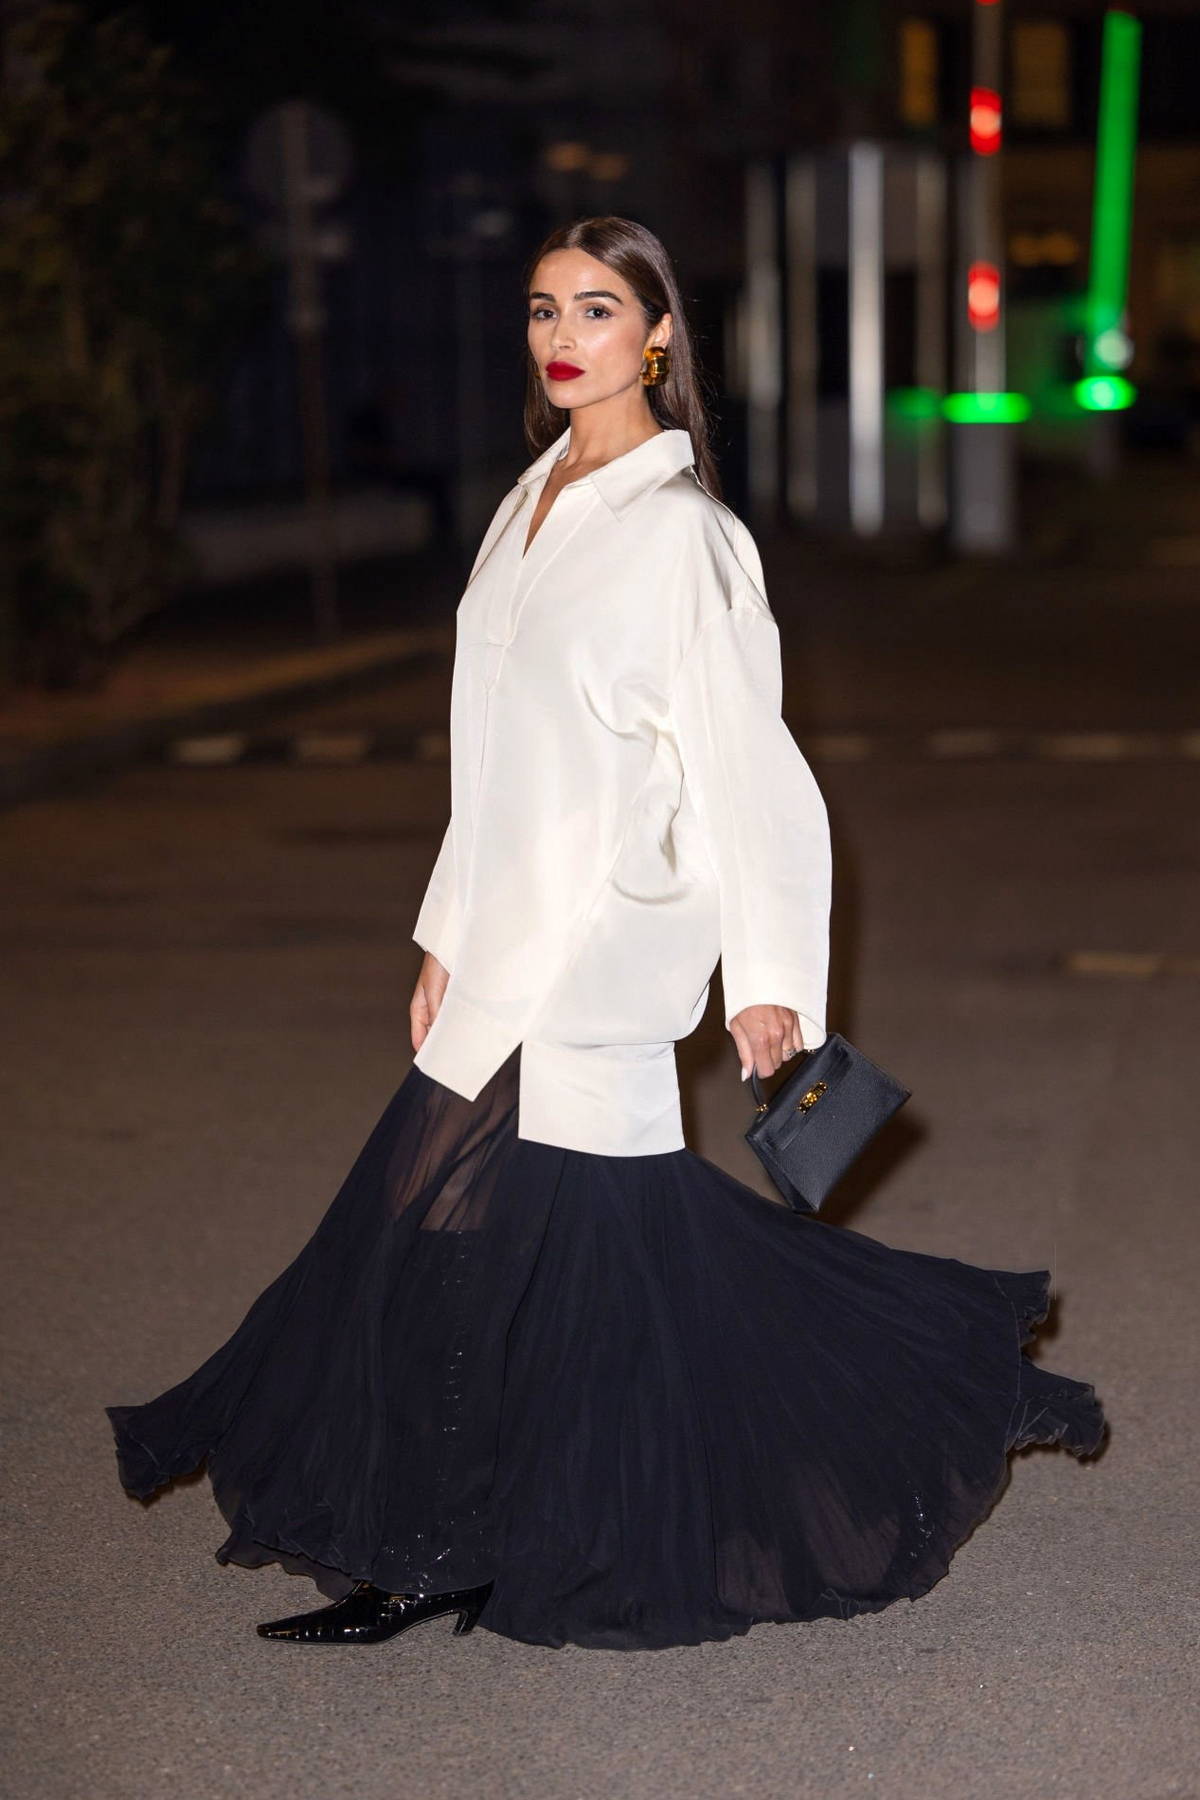 Olivia Culpo Bvlgari Dinner Party in Milan February 22, 2019 – Star Style